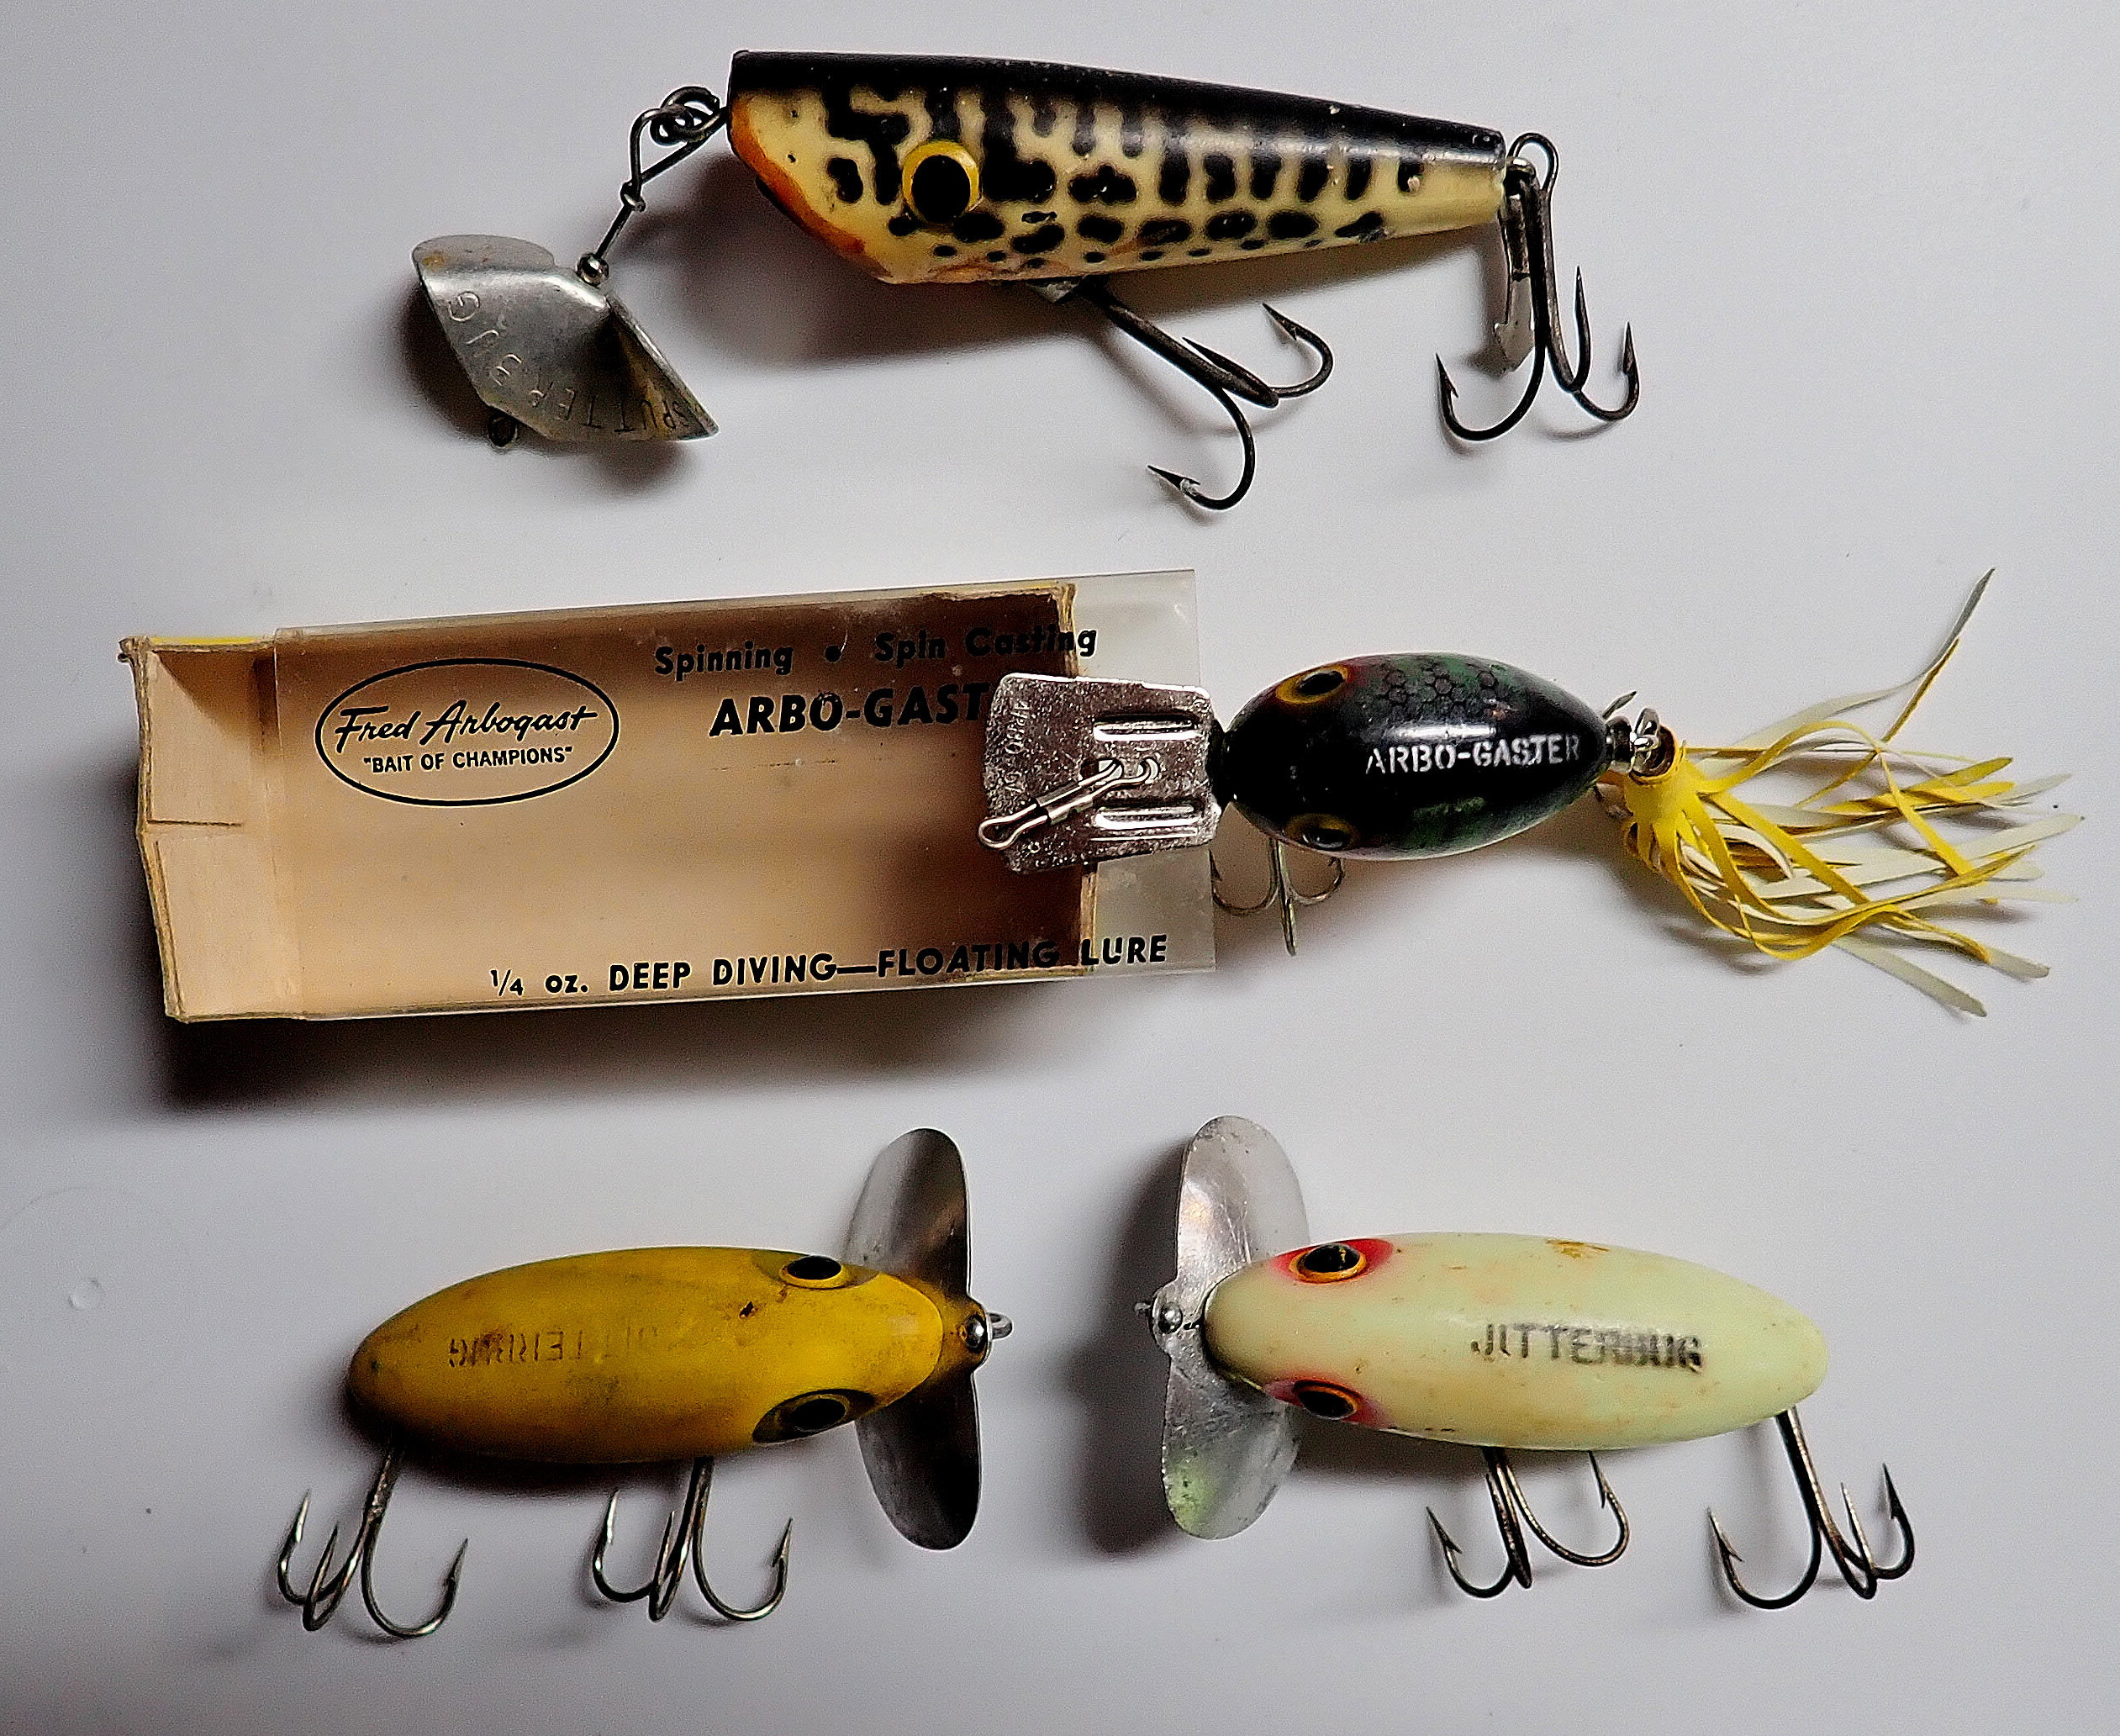 Sold at Auction: Early Fred Arbogast Jitterbug Fishing Lure In Box